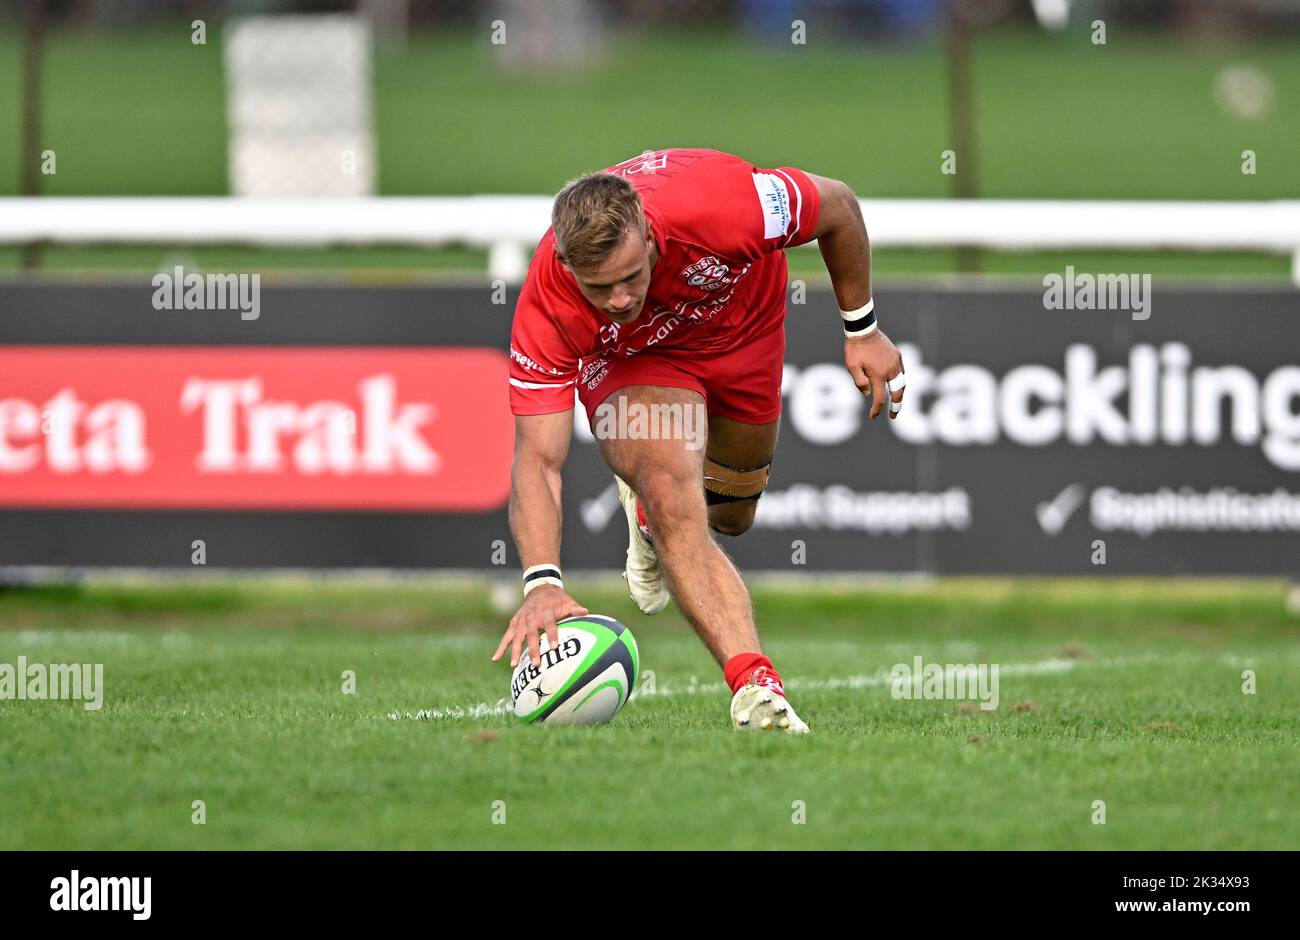 Richmond, United Kingdom. 24th Sep, 2022. Championship Rugby. London Scottish V Jersey Reds. The Richmond Athletic Ground. Richmond. Will Brown (Jersey Reds) runs in to score another try during the London Scottish V Jersey Reds championship rugby match. Credit: Sport In Pictures/Alamy Live News Stock Photo